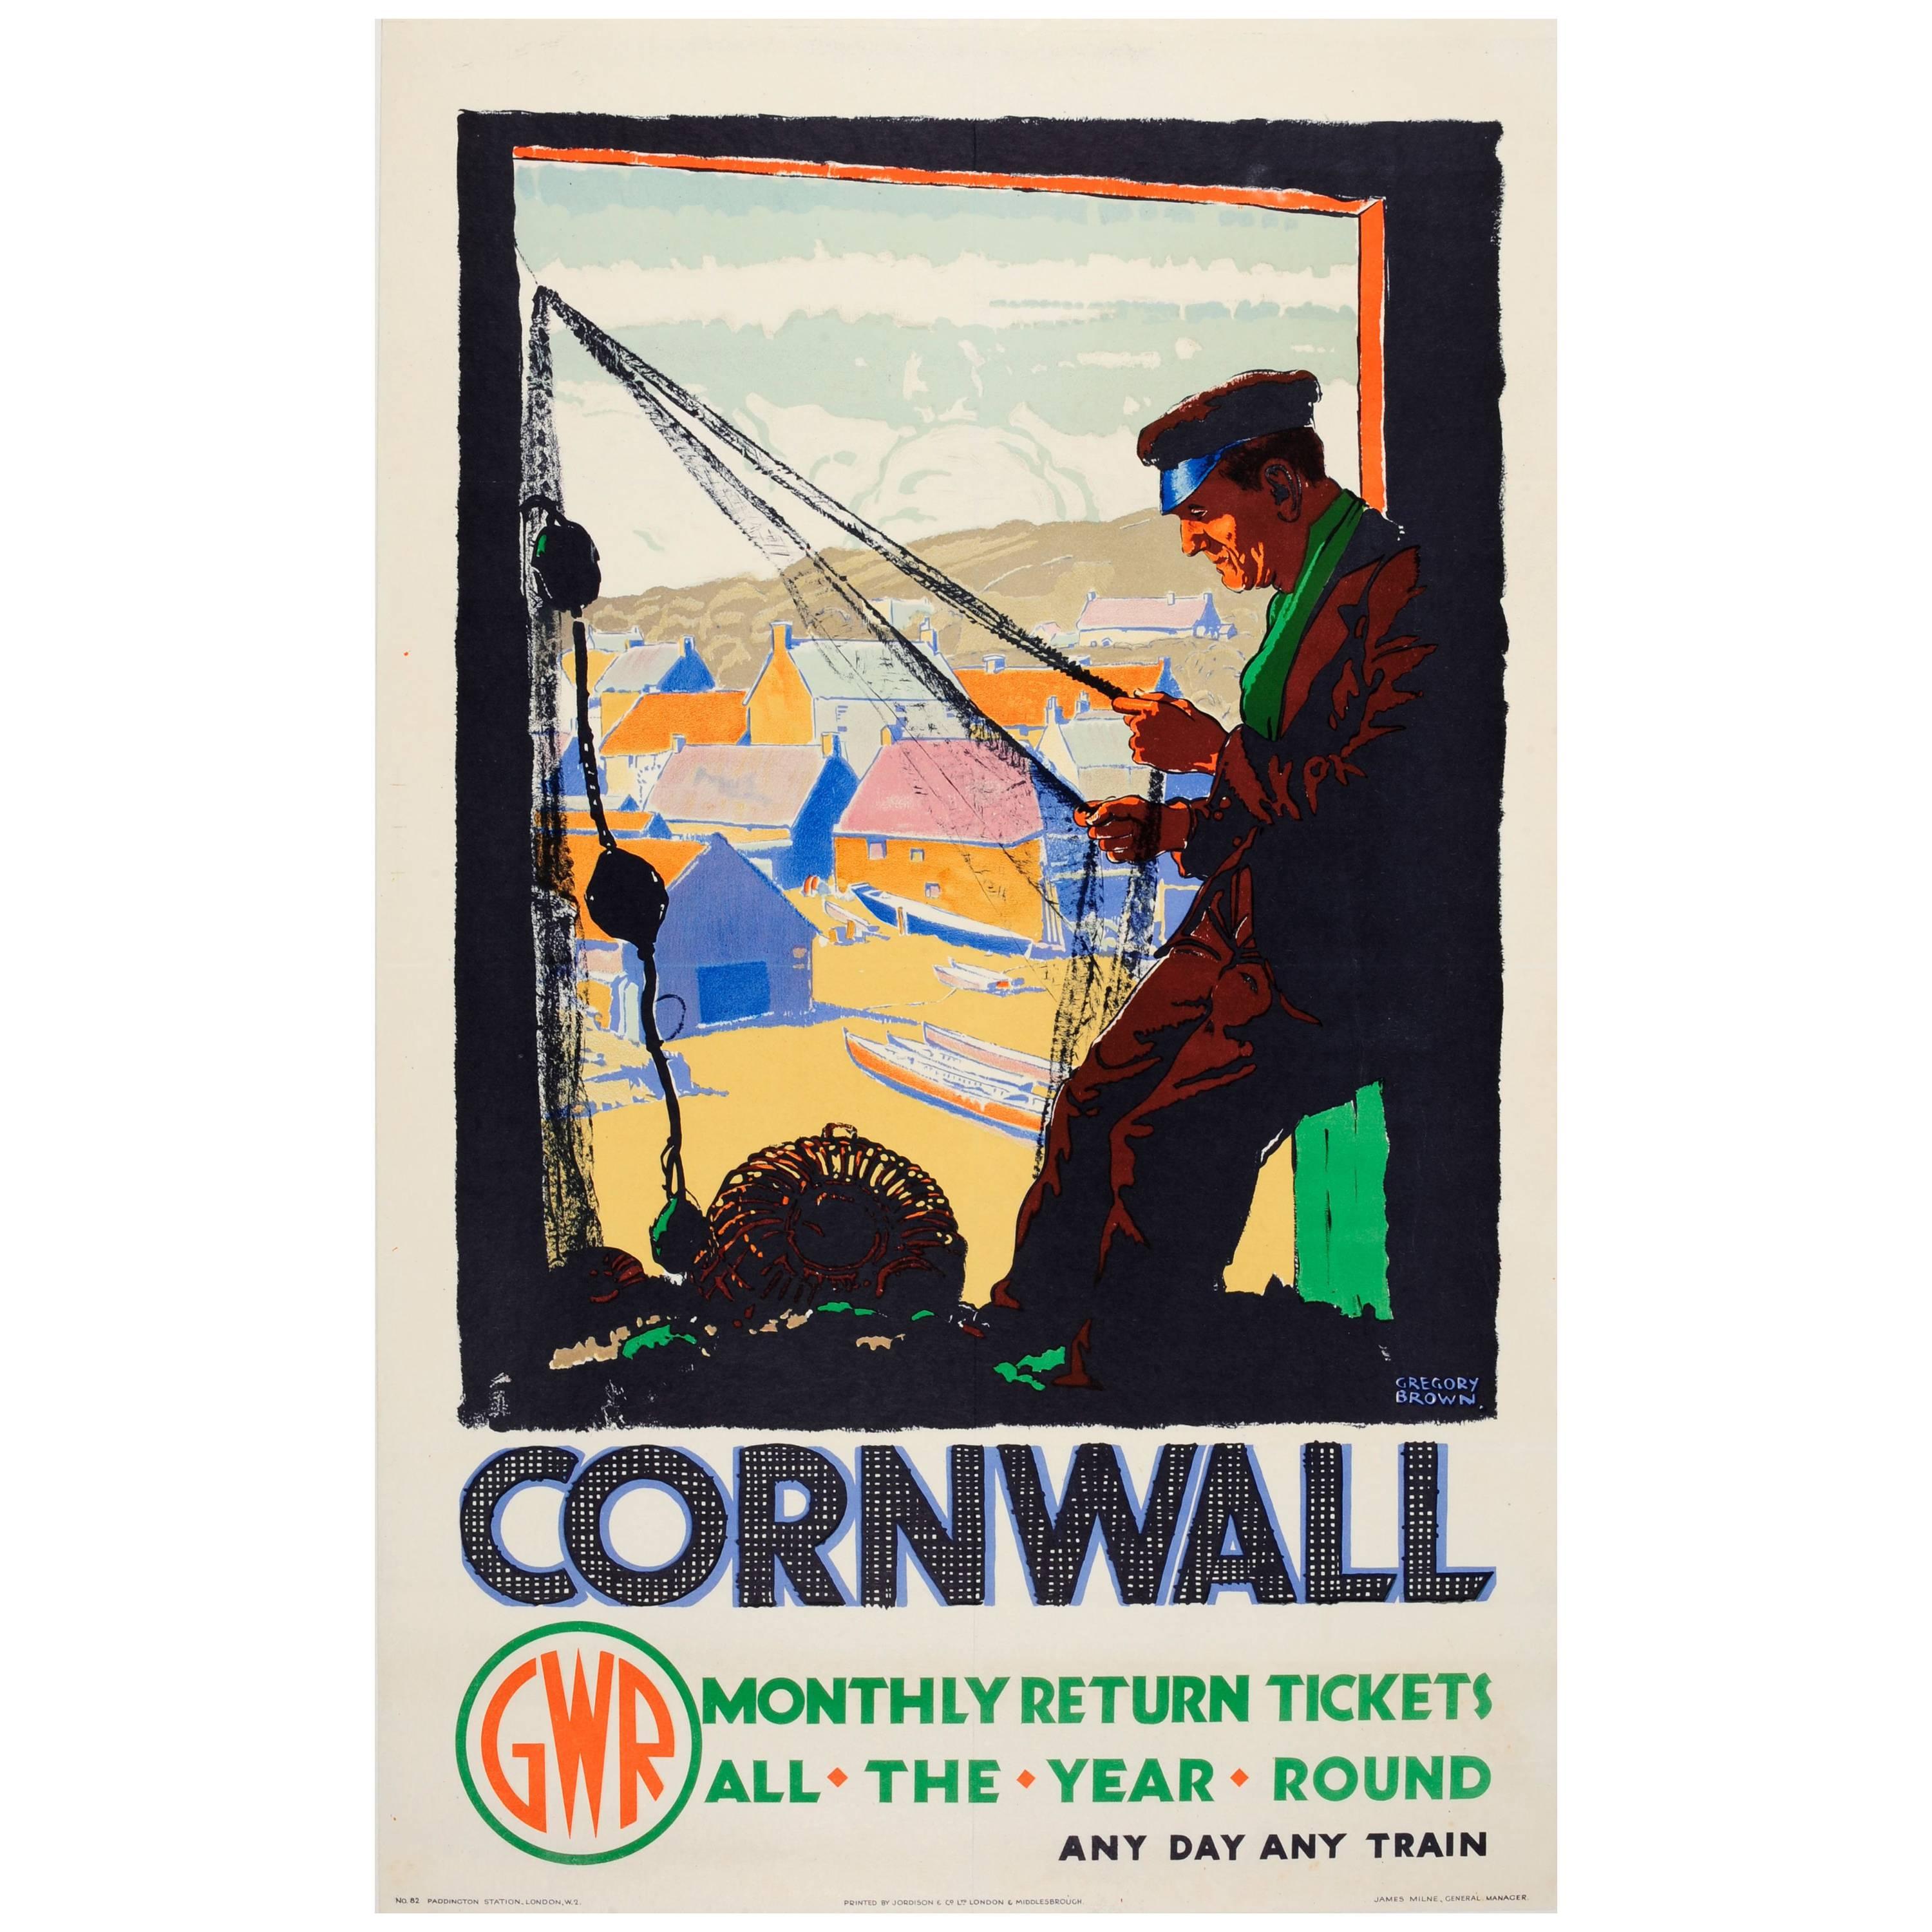 Original Vintage GWR Great Western Railway Travel Poster for Cornwall by Train